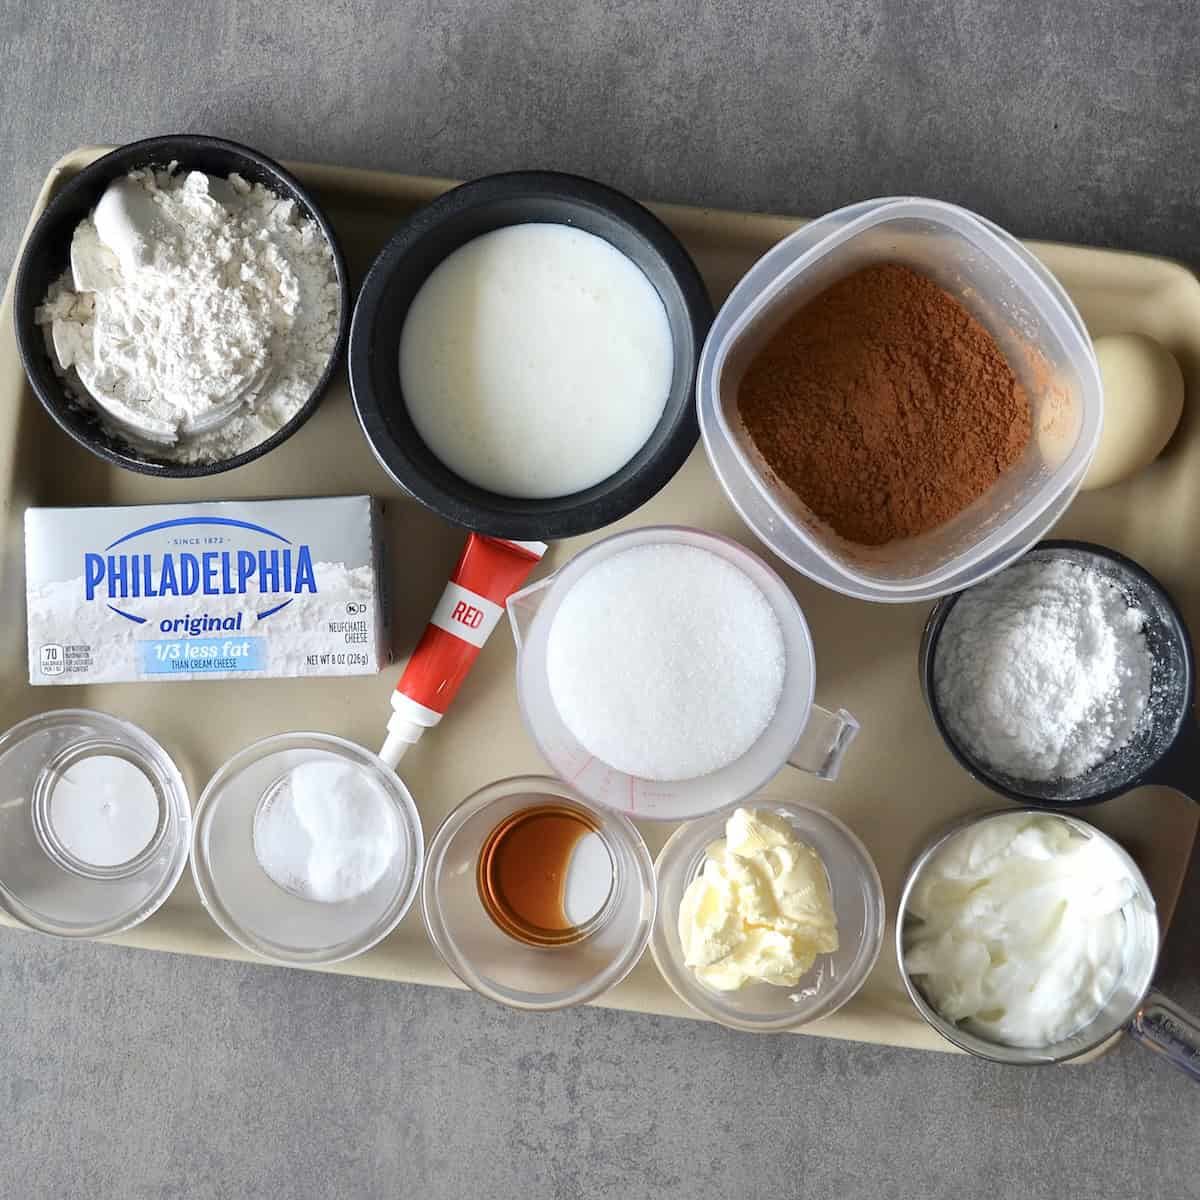 Ingredients needed for homemade cupcakes